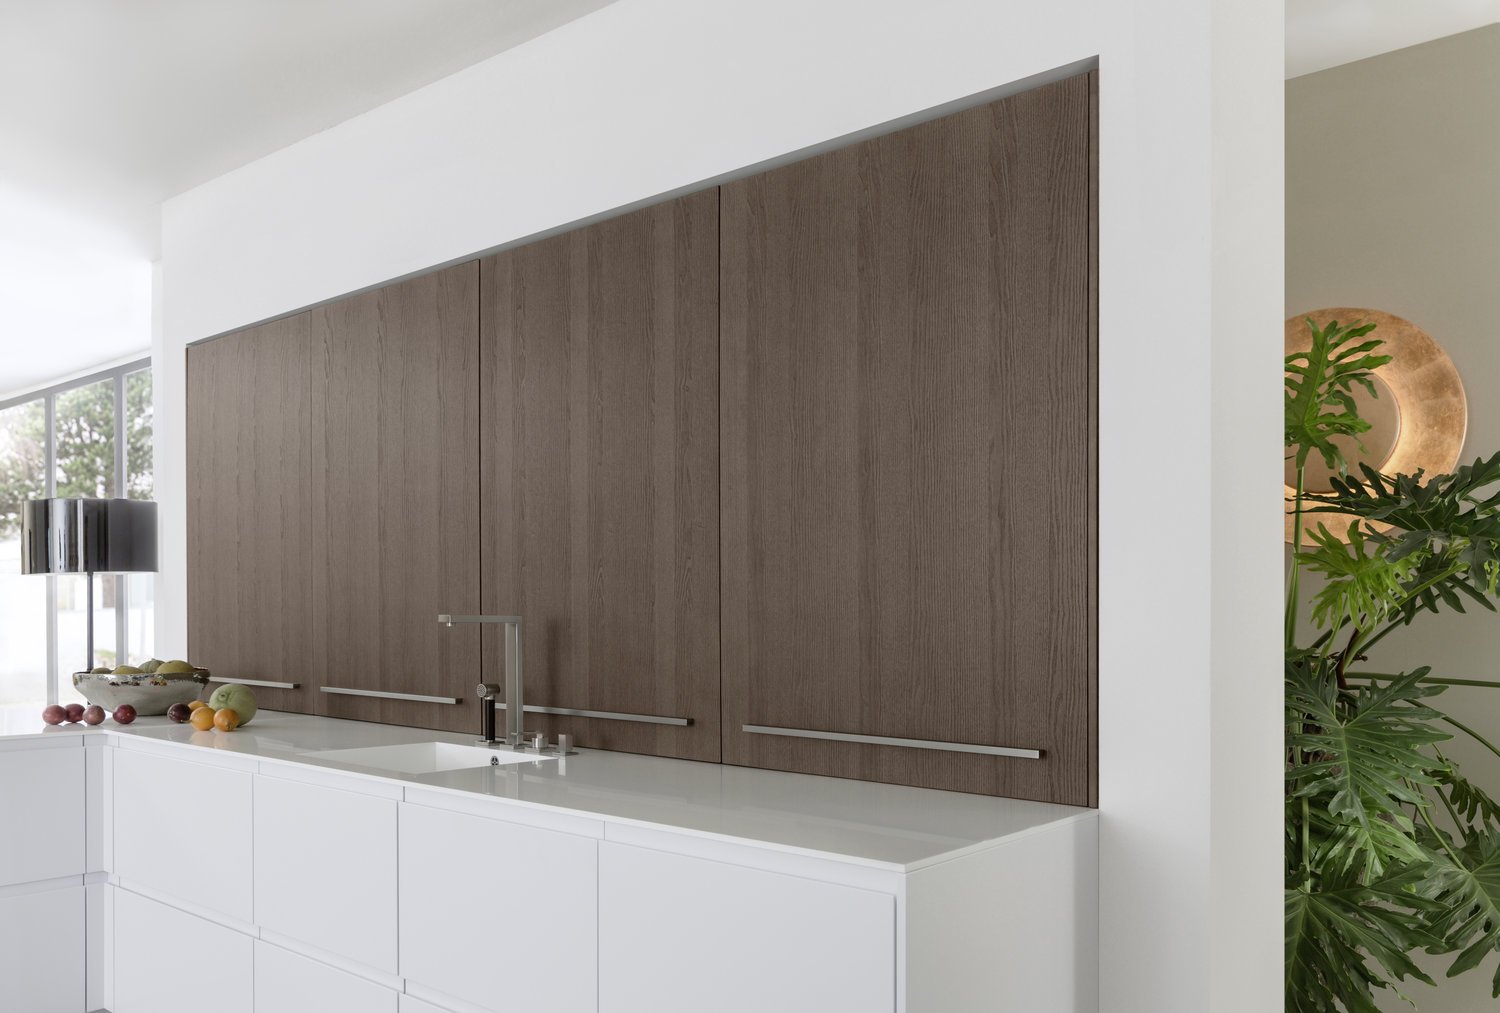 PUR-FS  TOPOS connaught kitchens wall storage.jpg